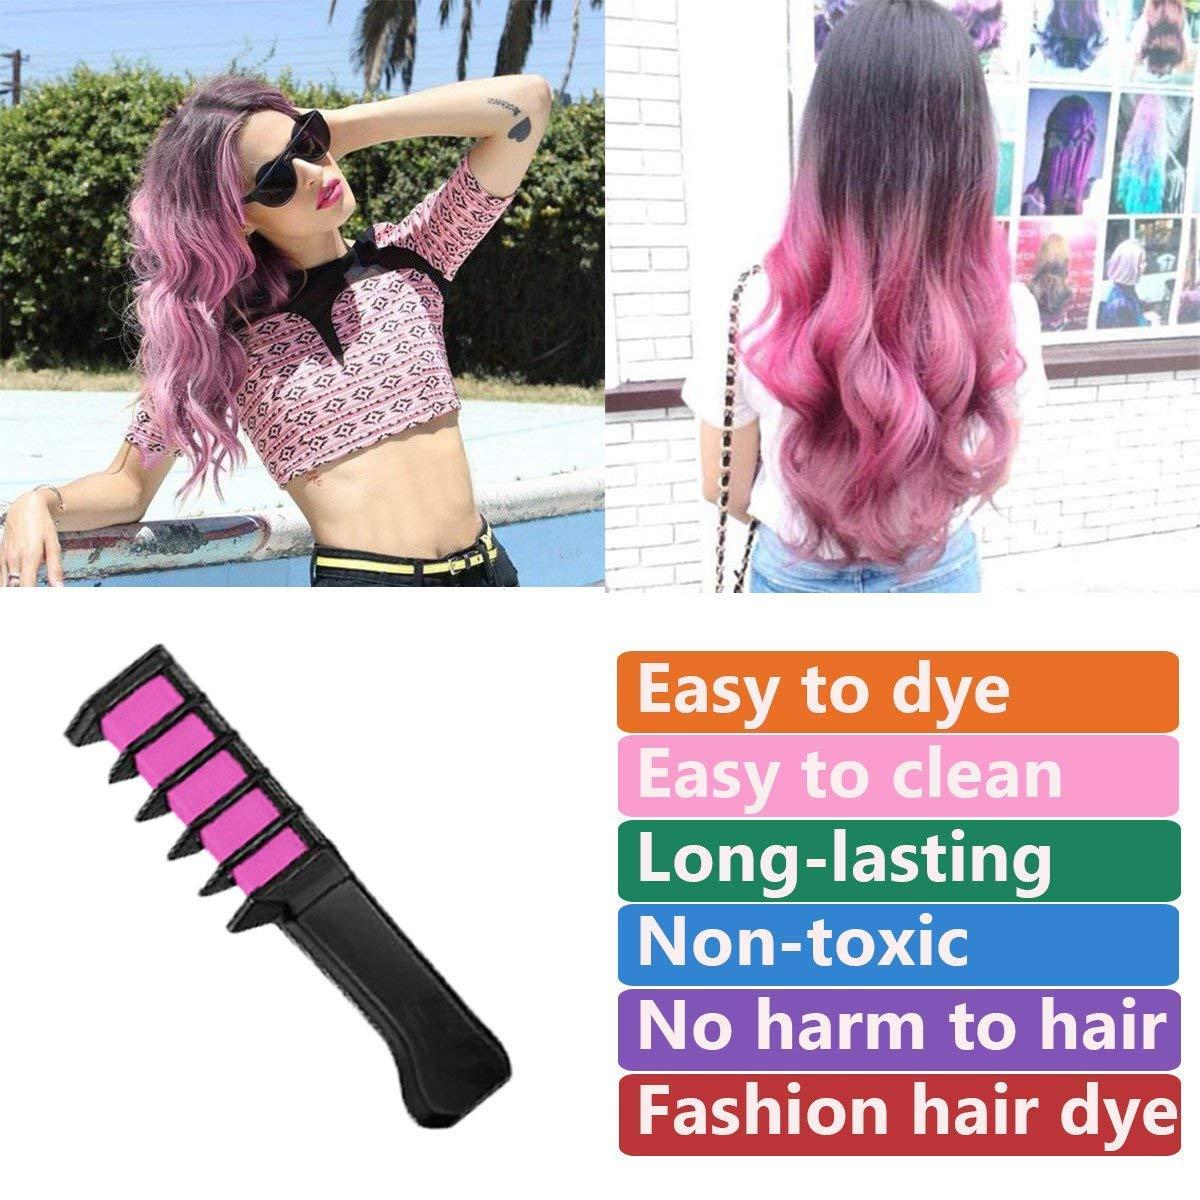 New Hair Chalk Comb Temporary Hair Color Dye for Girls Kids, Washable Hair  Chalk for Girls Age 4 5 6 7 8 9 10 Birthday Cosplay DIY, Halloween,  Christmas 6 Colors Purple, Blue, Green, Orange, Pink, Red